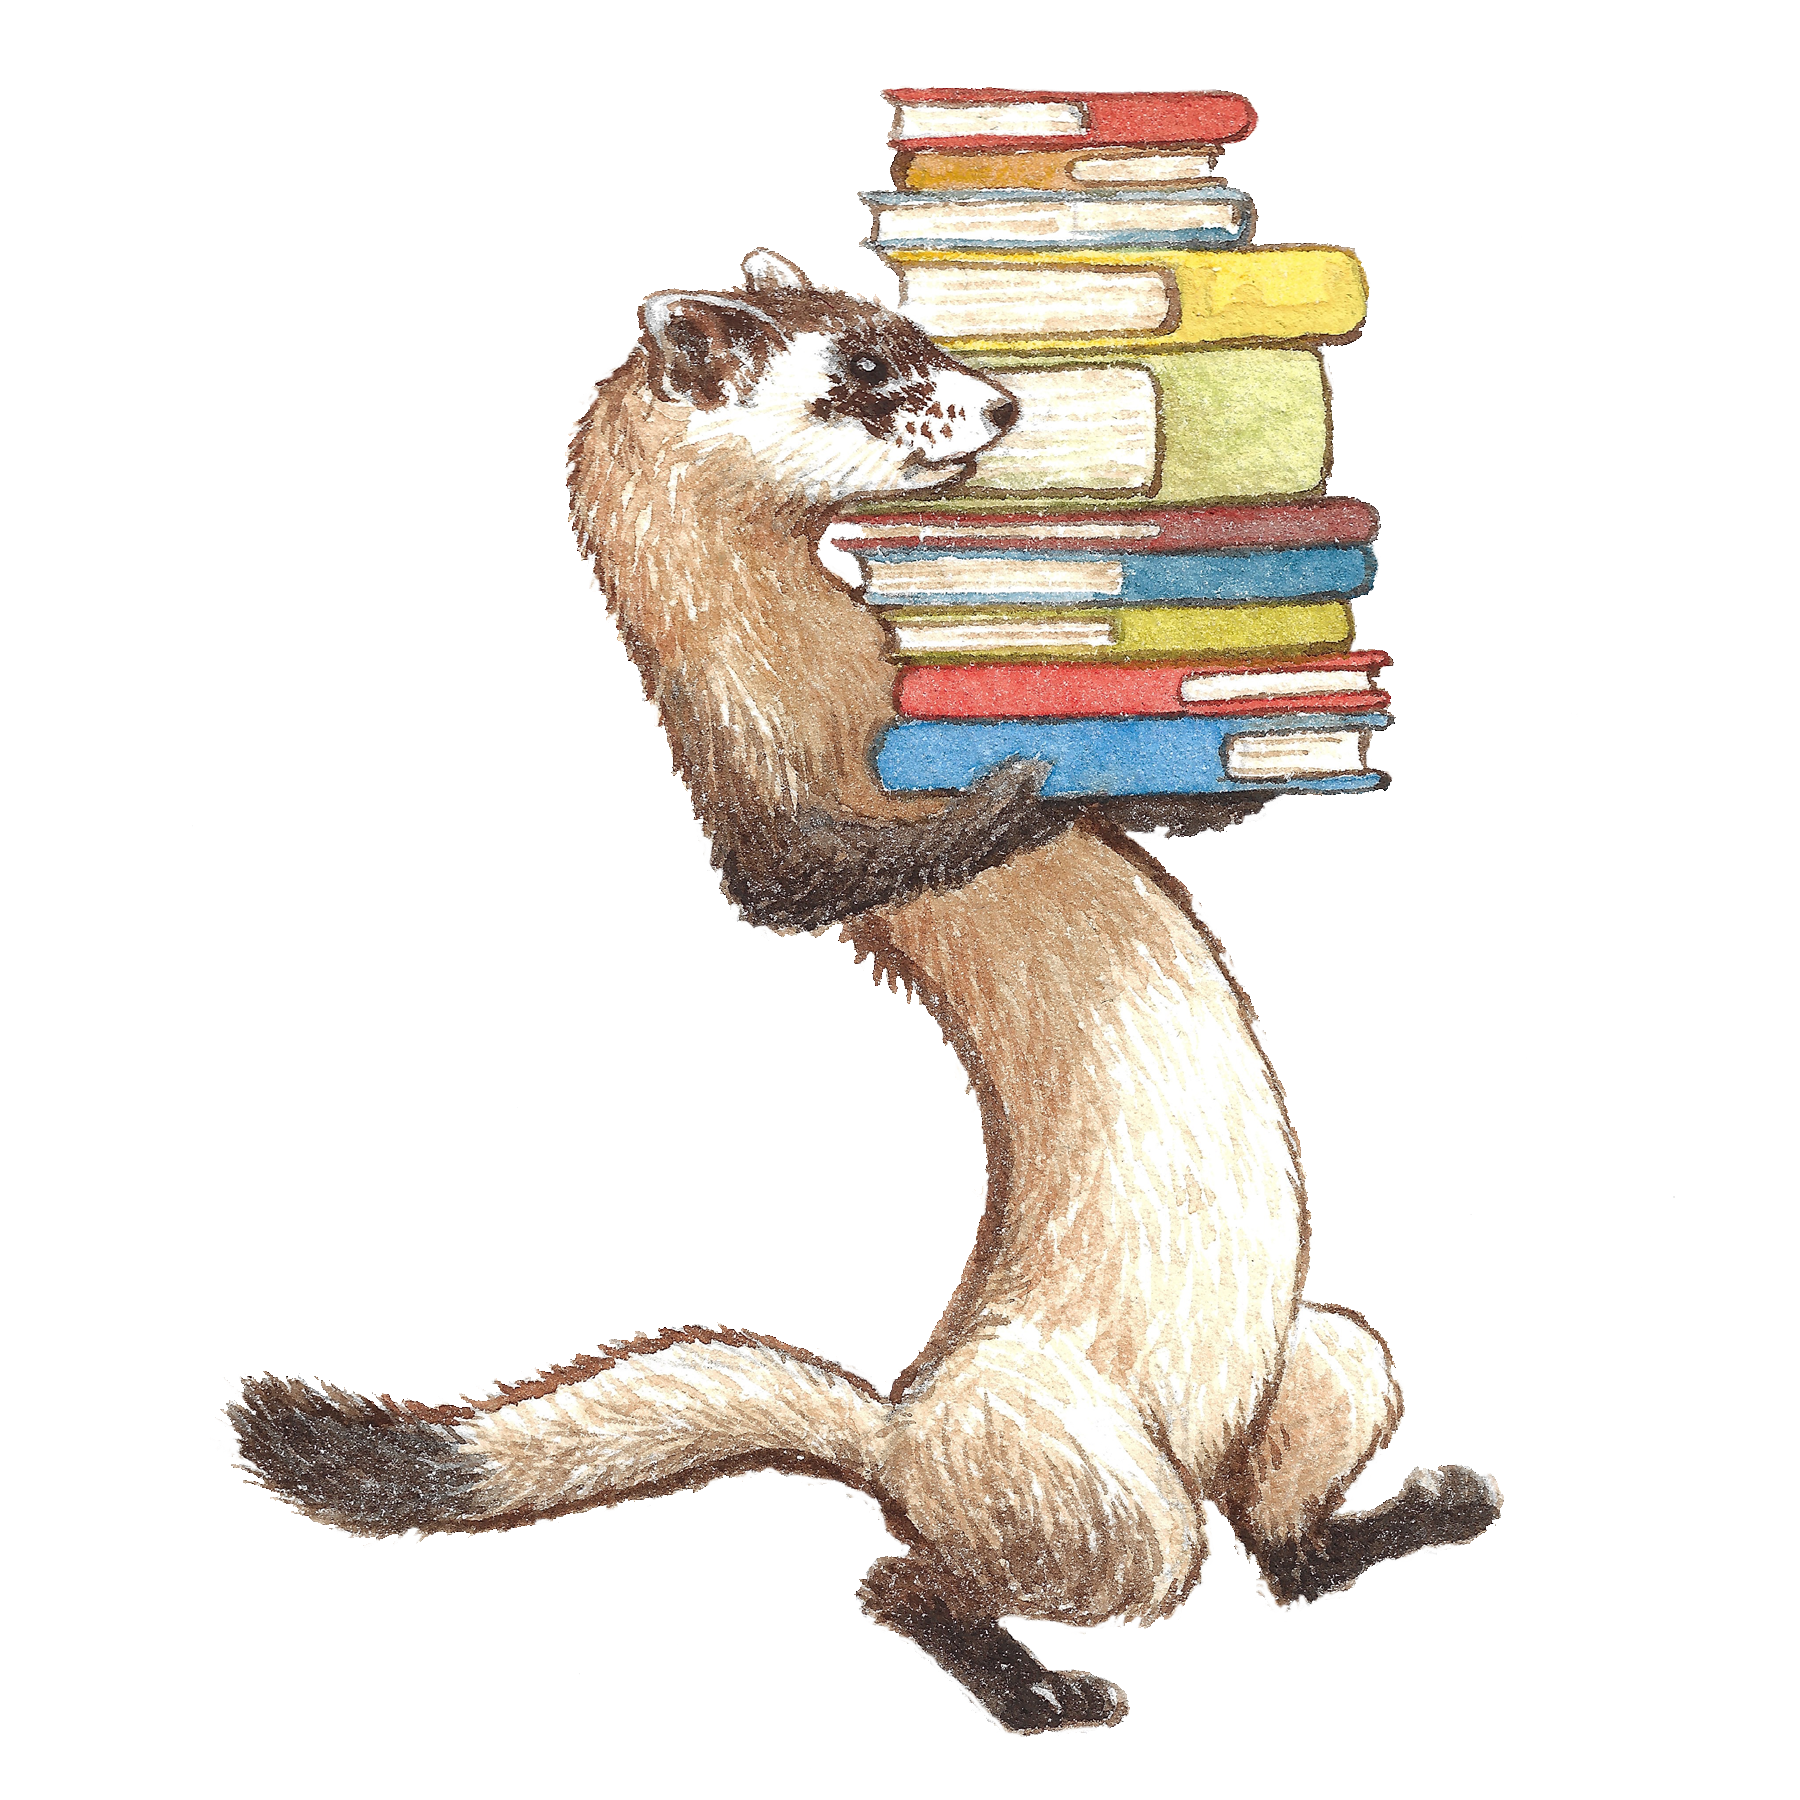 Black-Footed Ferret with Books